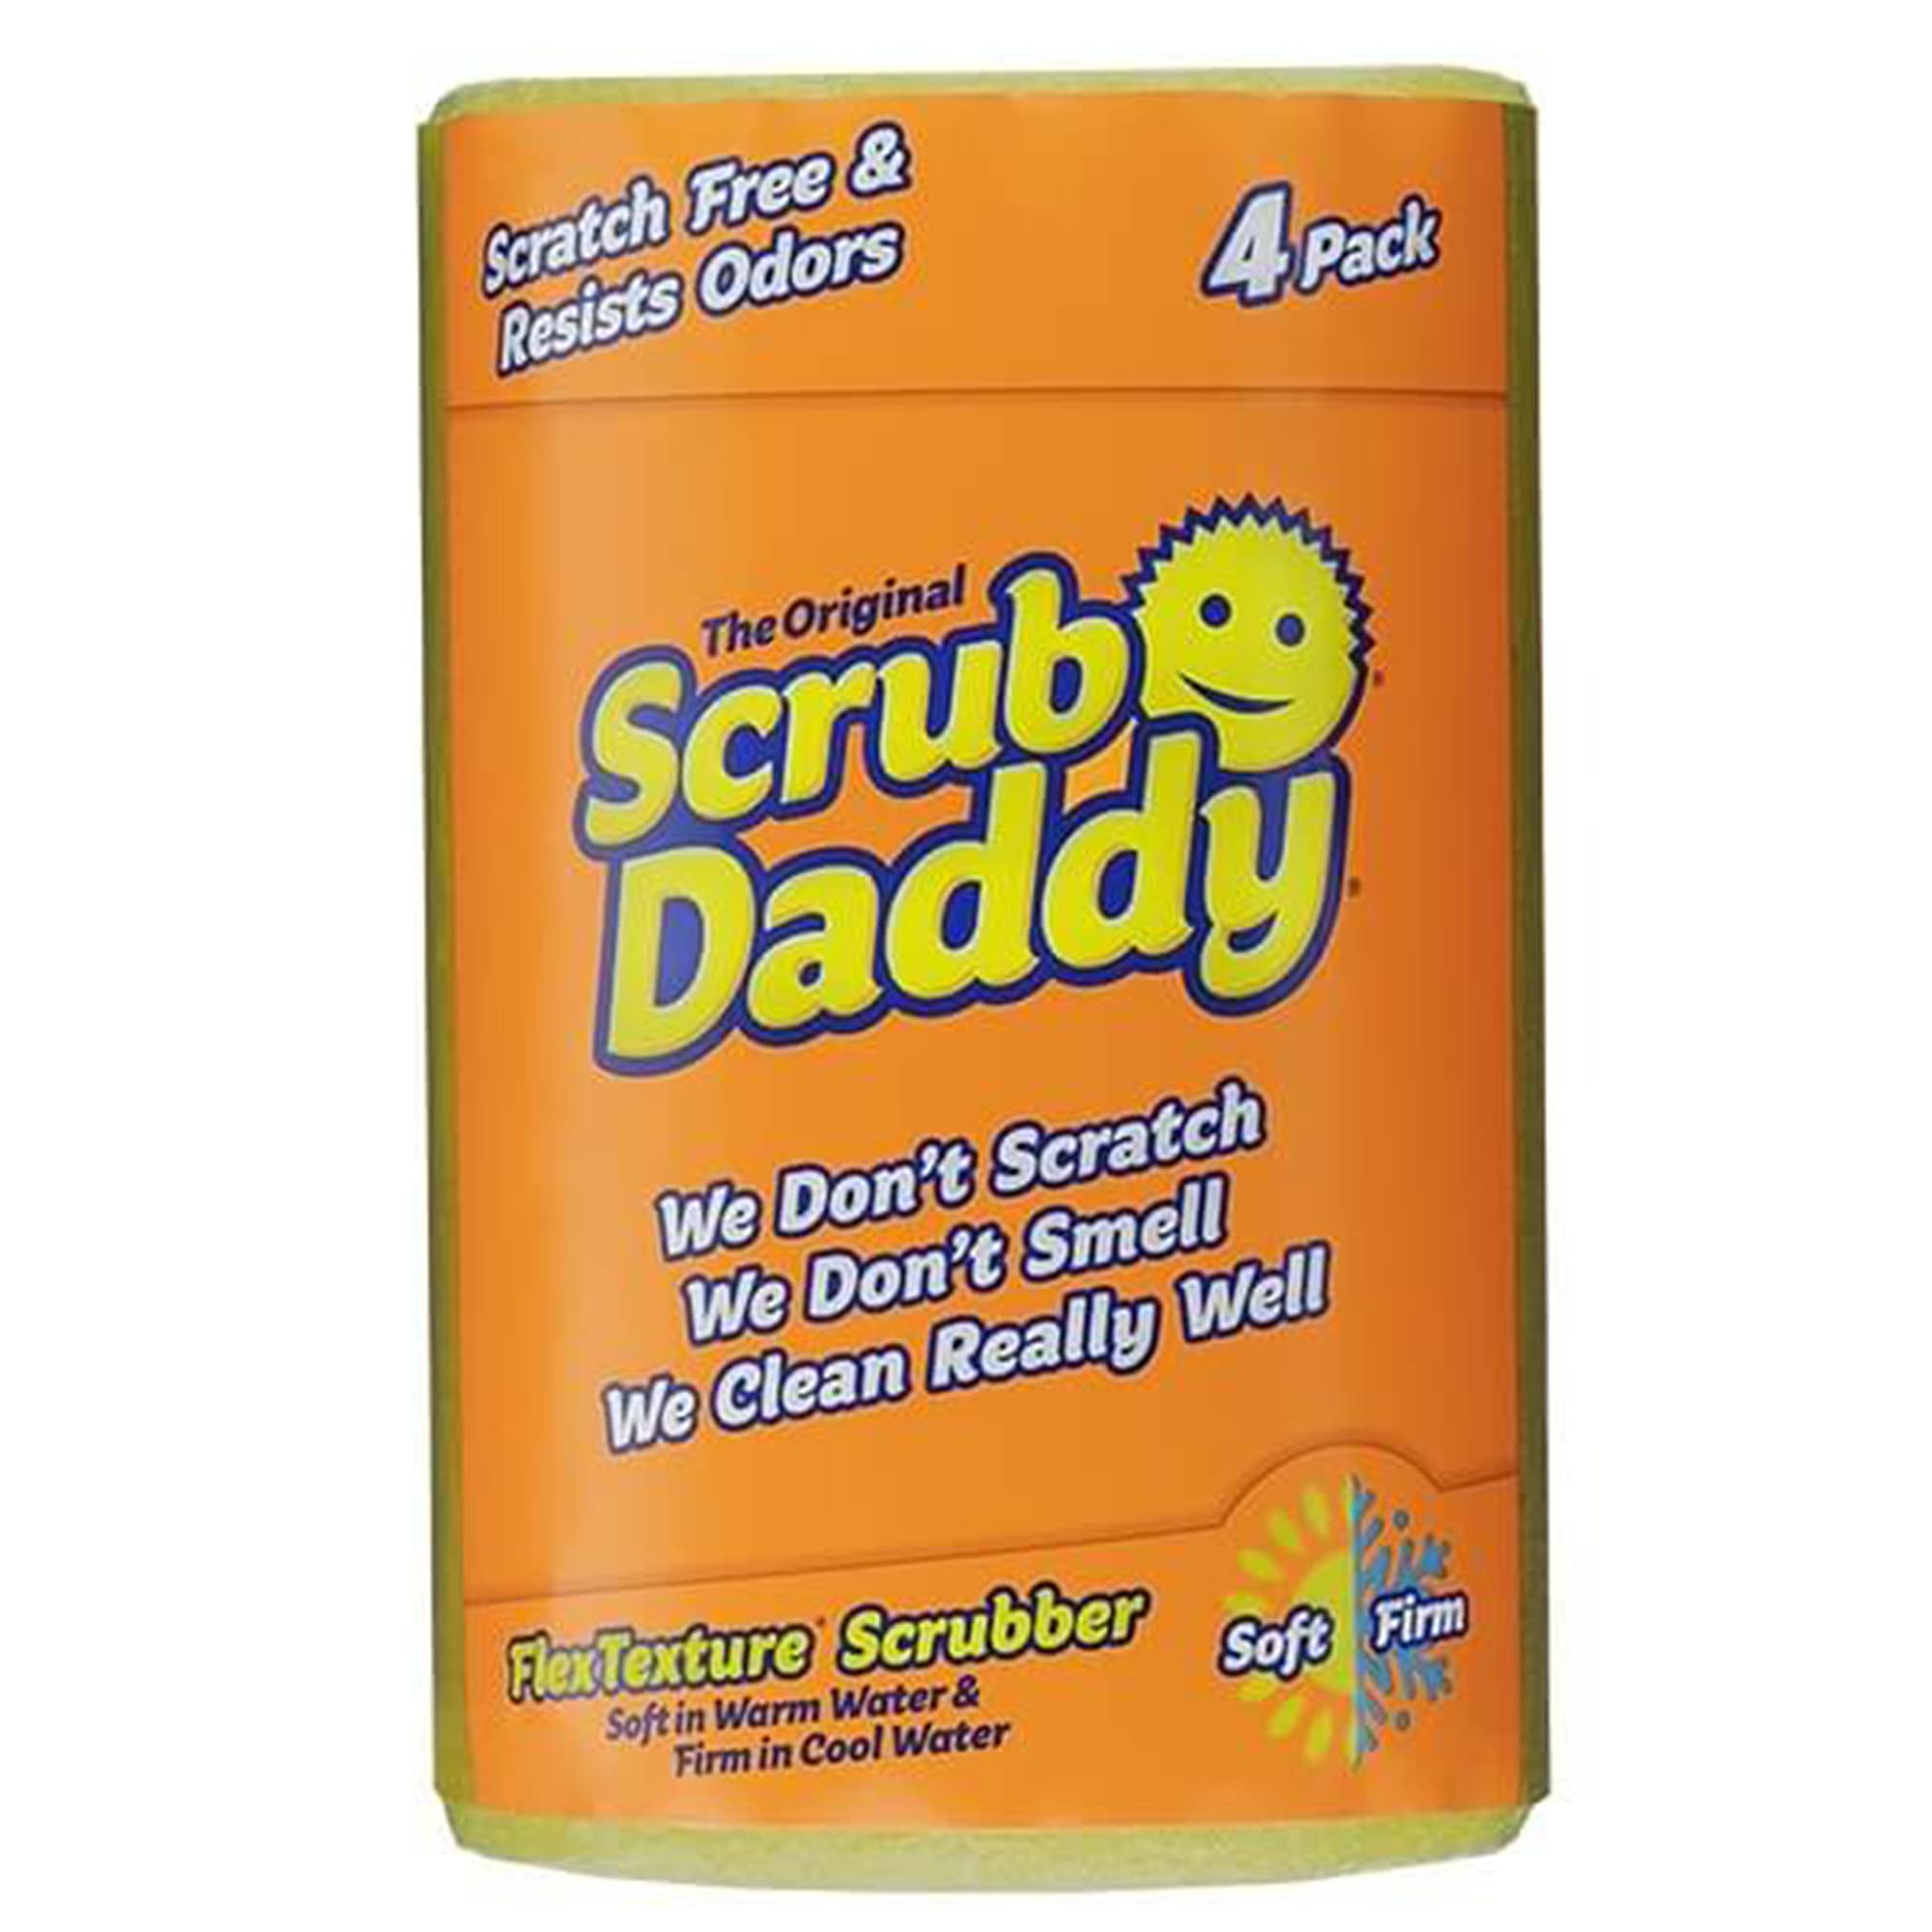 Book Cover The Original Scrub Daddy - FlexTexture Sponge, Soft in Warm Water, Firm in Cold, Deep Cleaning, Dishwasher Safe, Multi-use, Scratch Free, Odor Resistant, Functional, Ergonomic, 4ct Roll